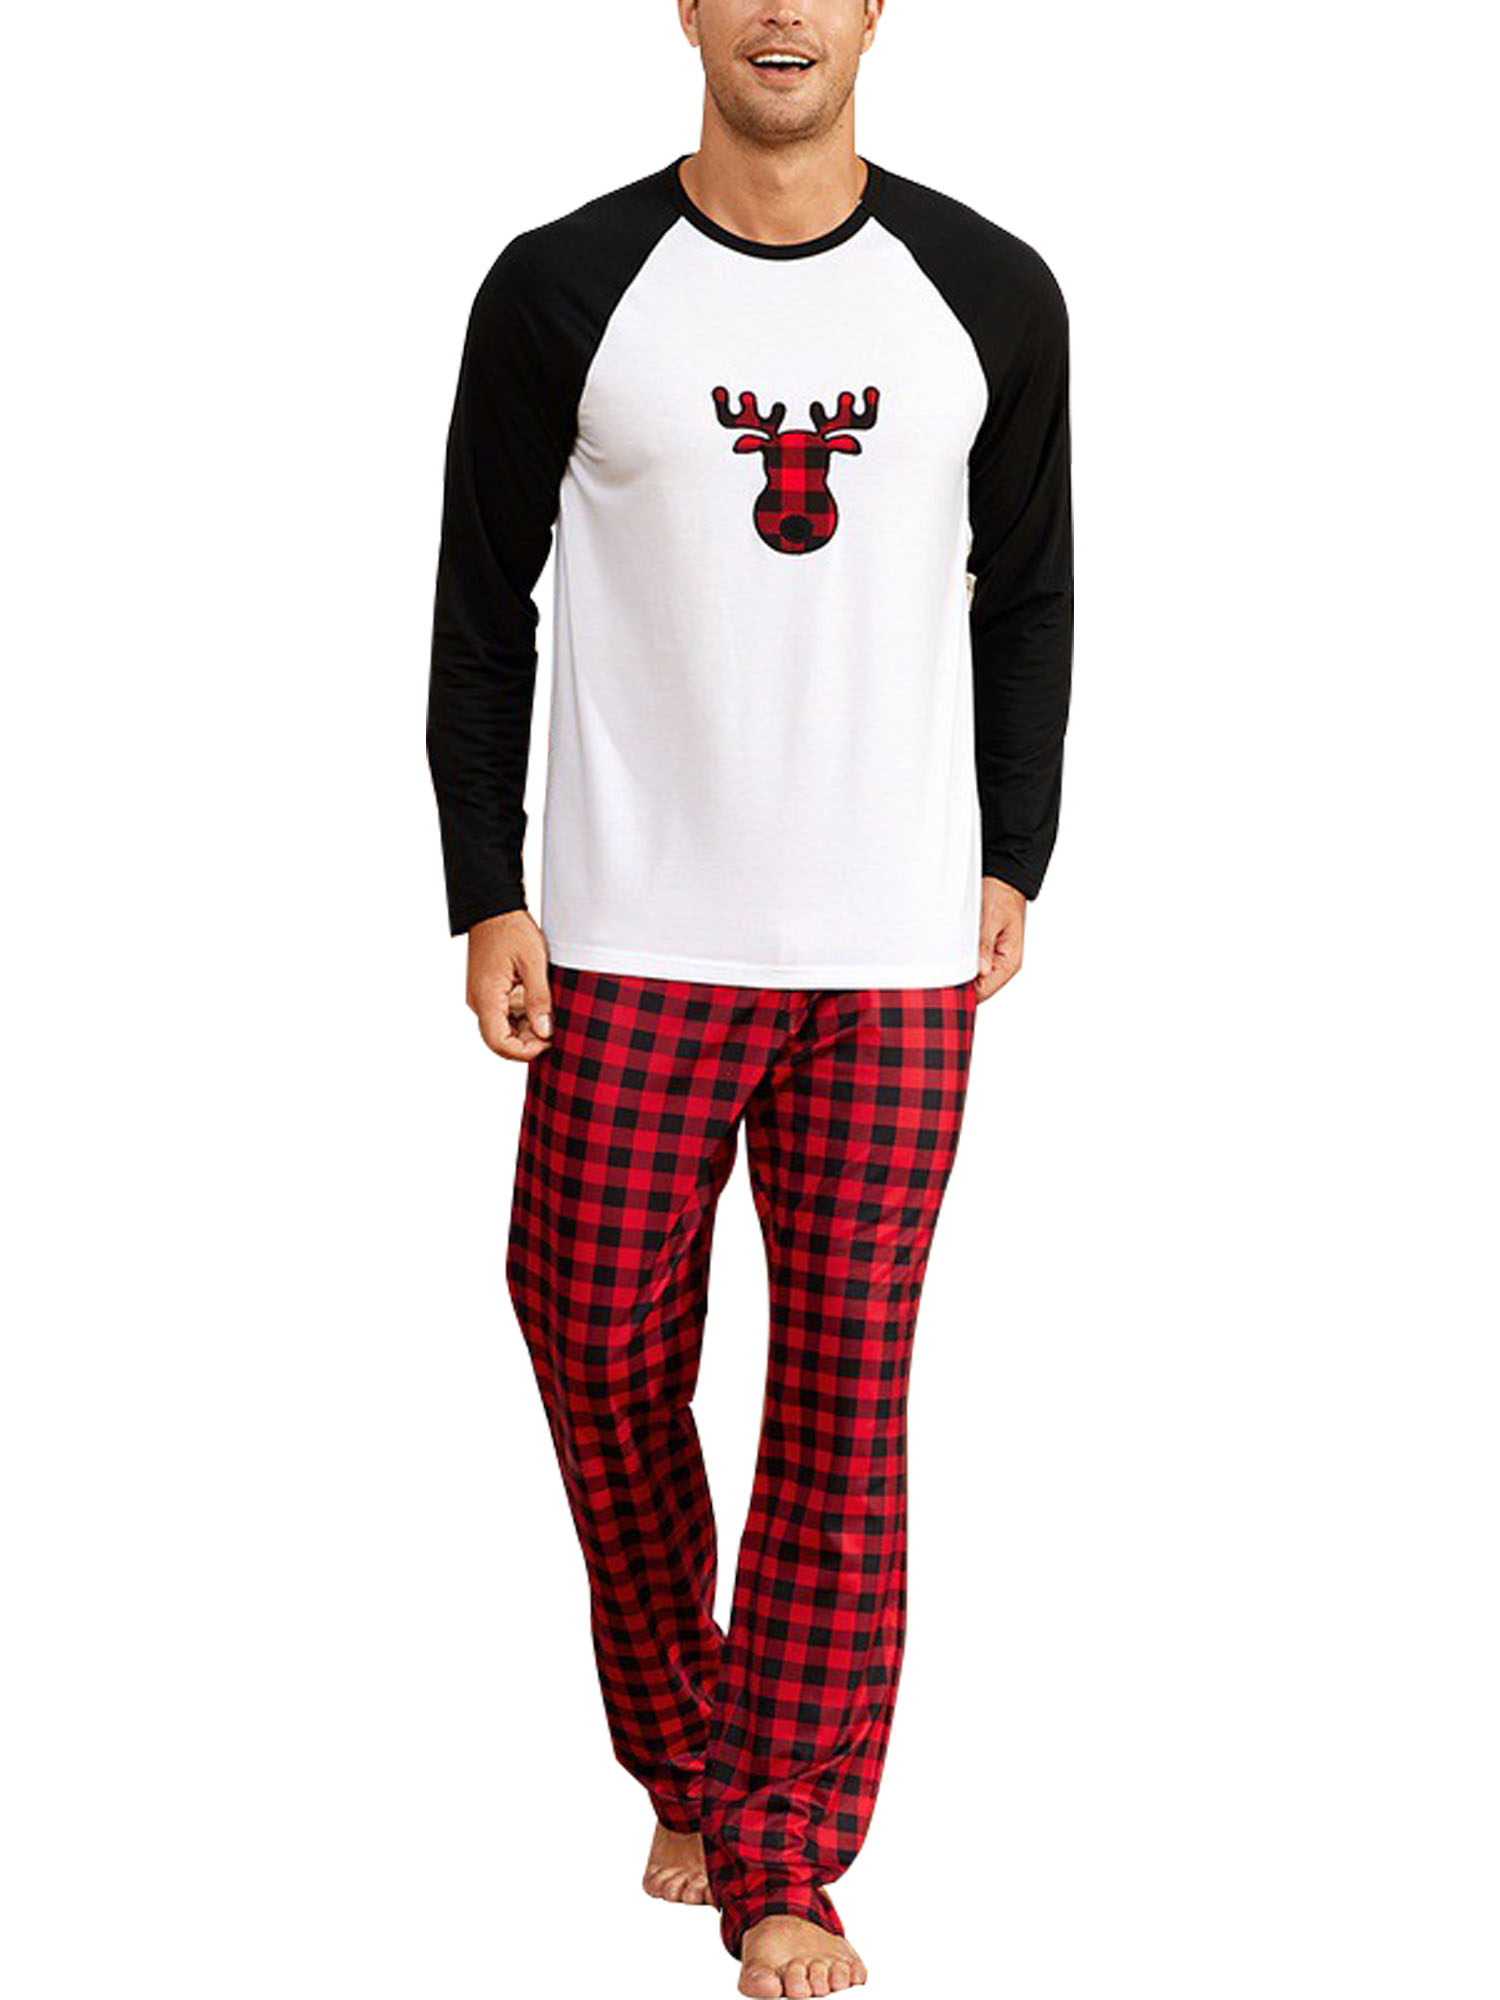 Matching Family Pajamas Sets Christmas PJs Funny Letter and Plaid Printed Long Sleeve Tee and Pants Loungewear